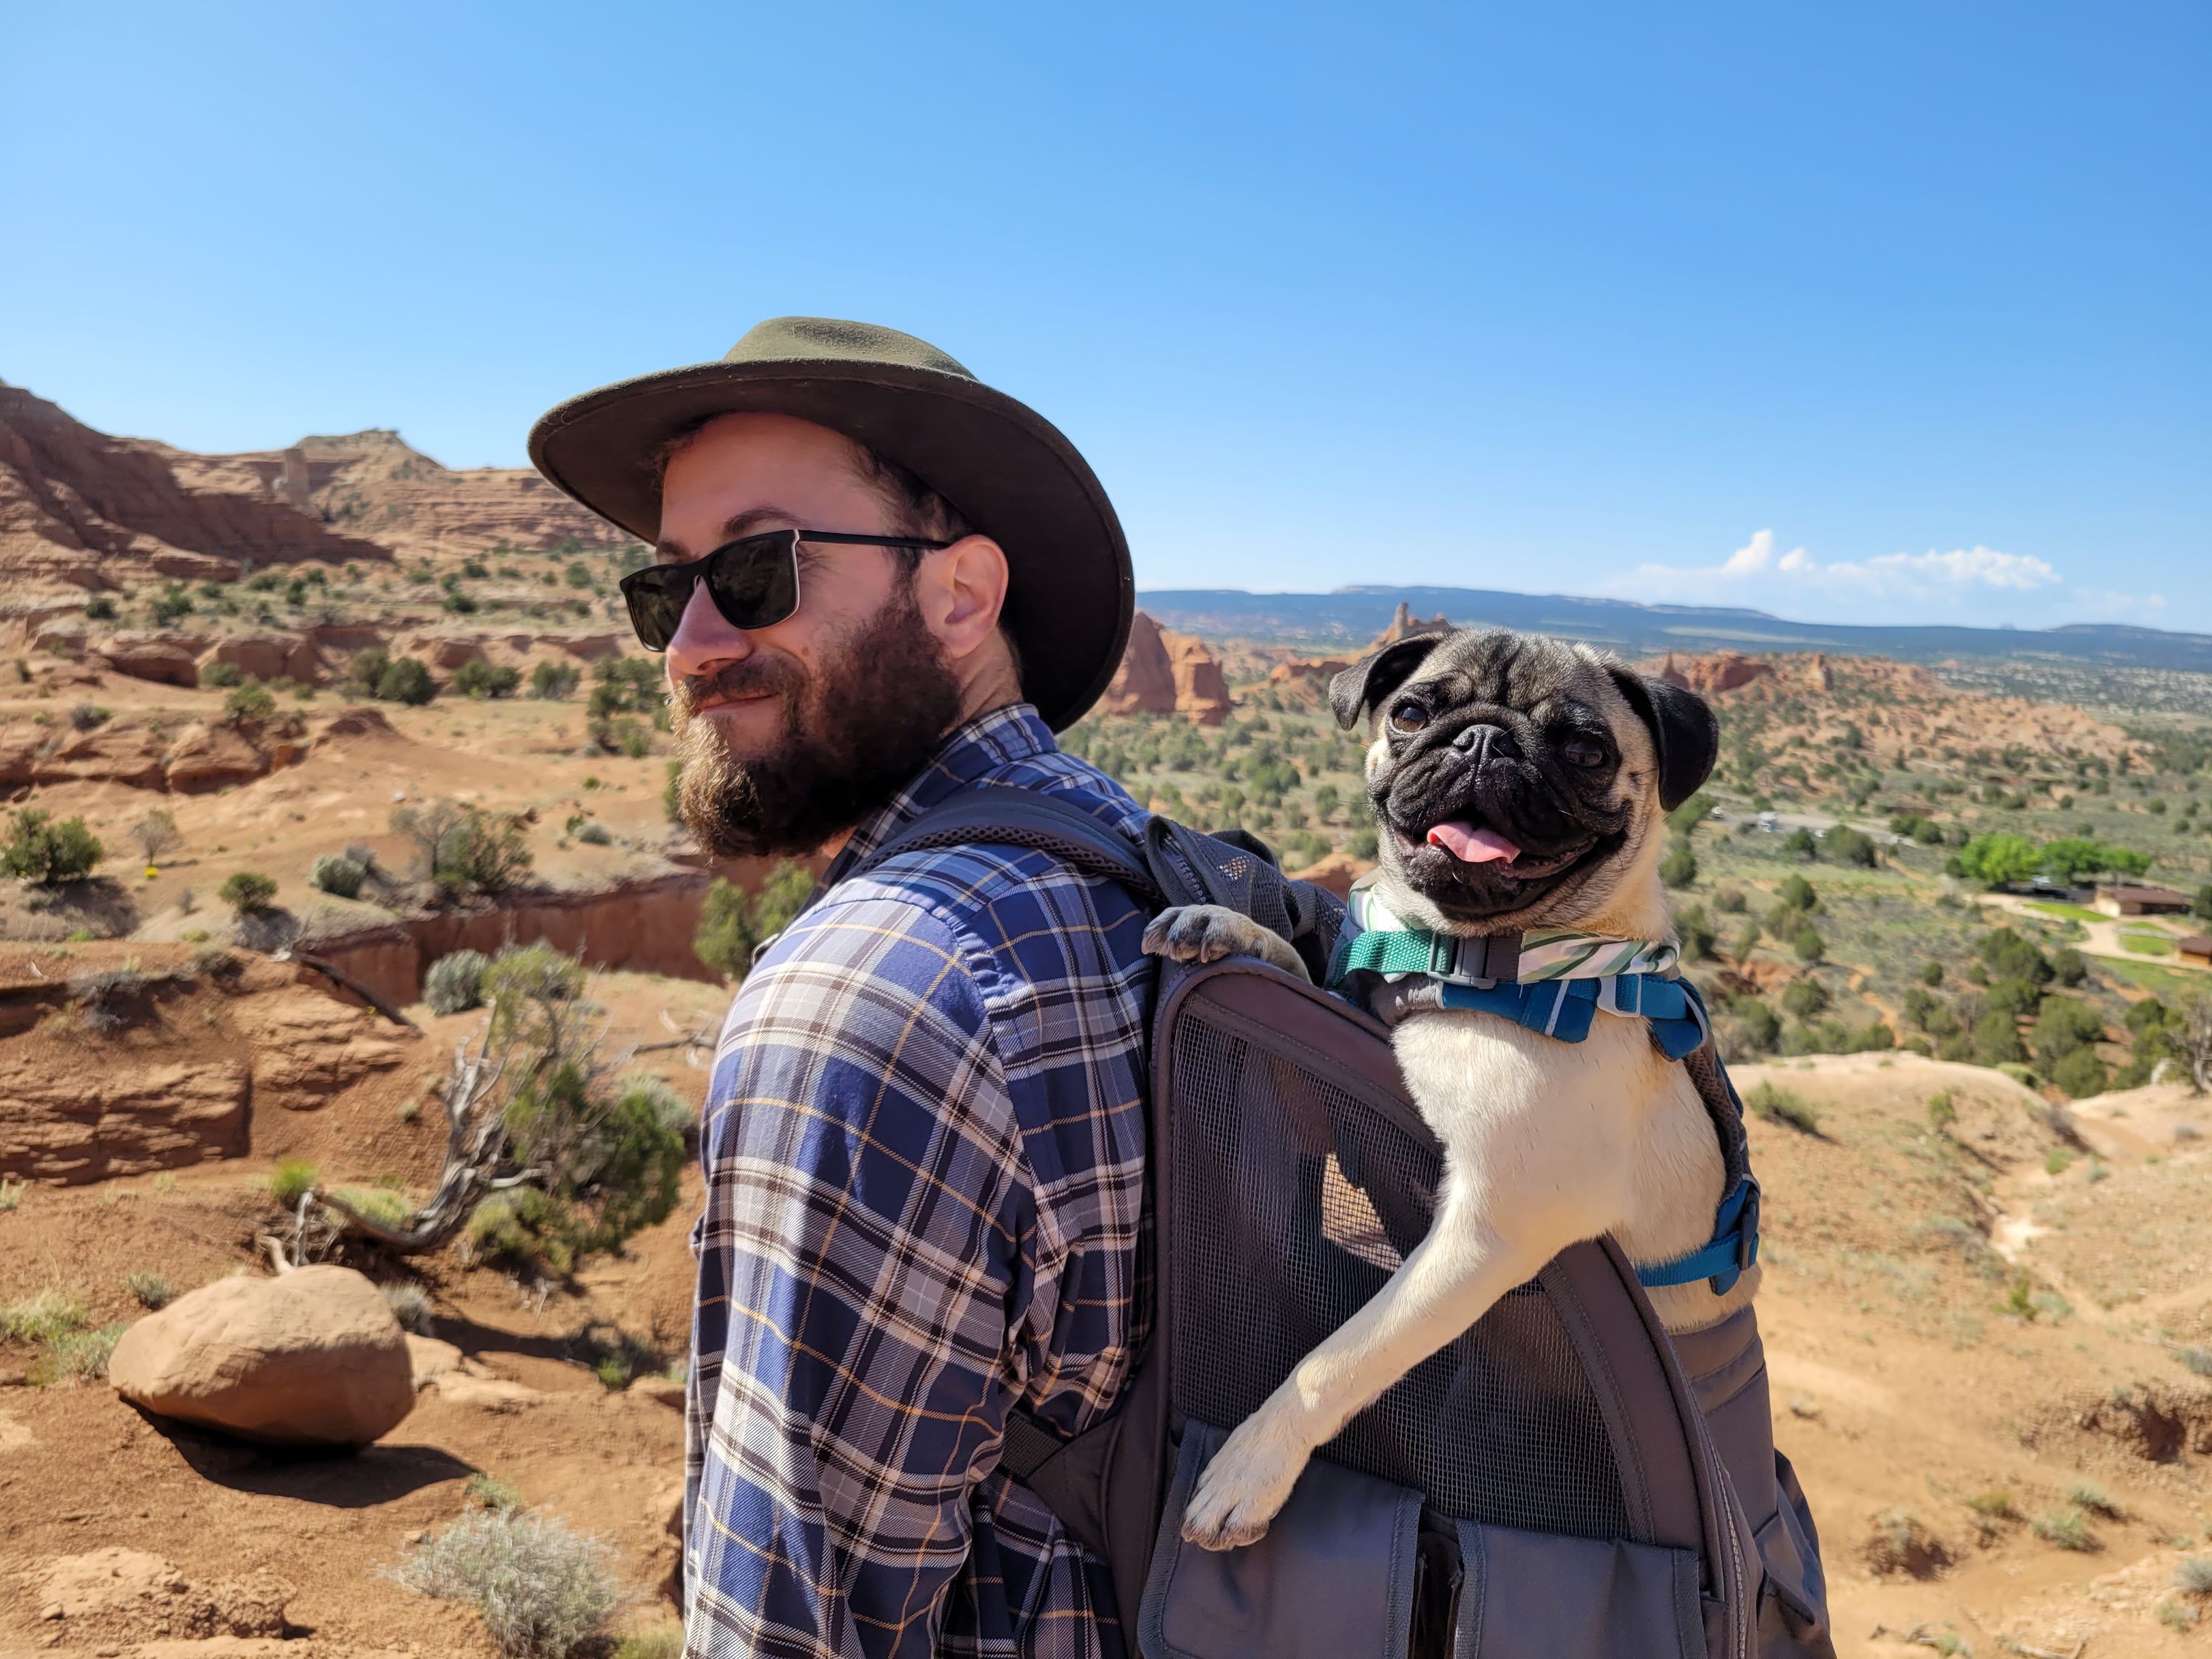 Man with dog in backpack on his back